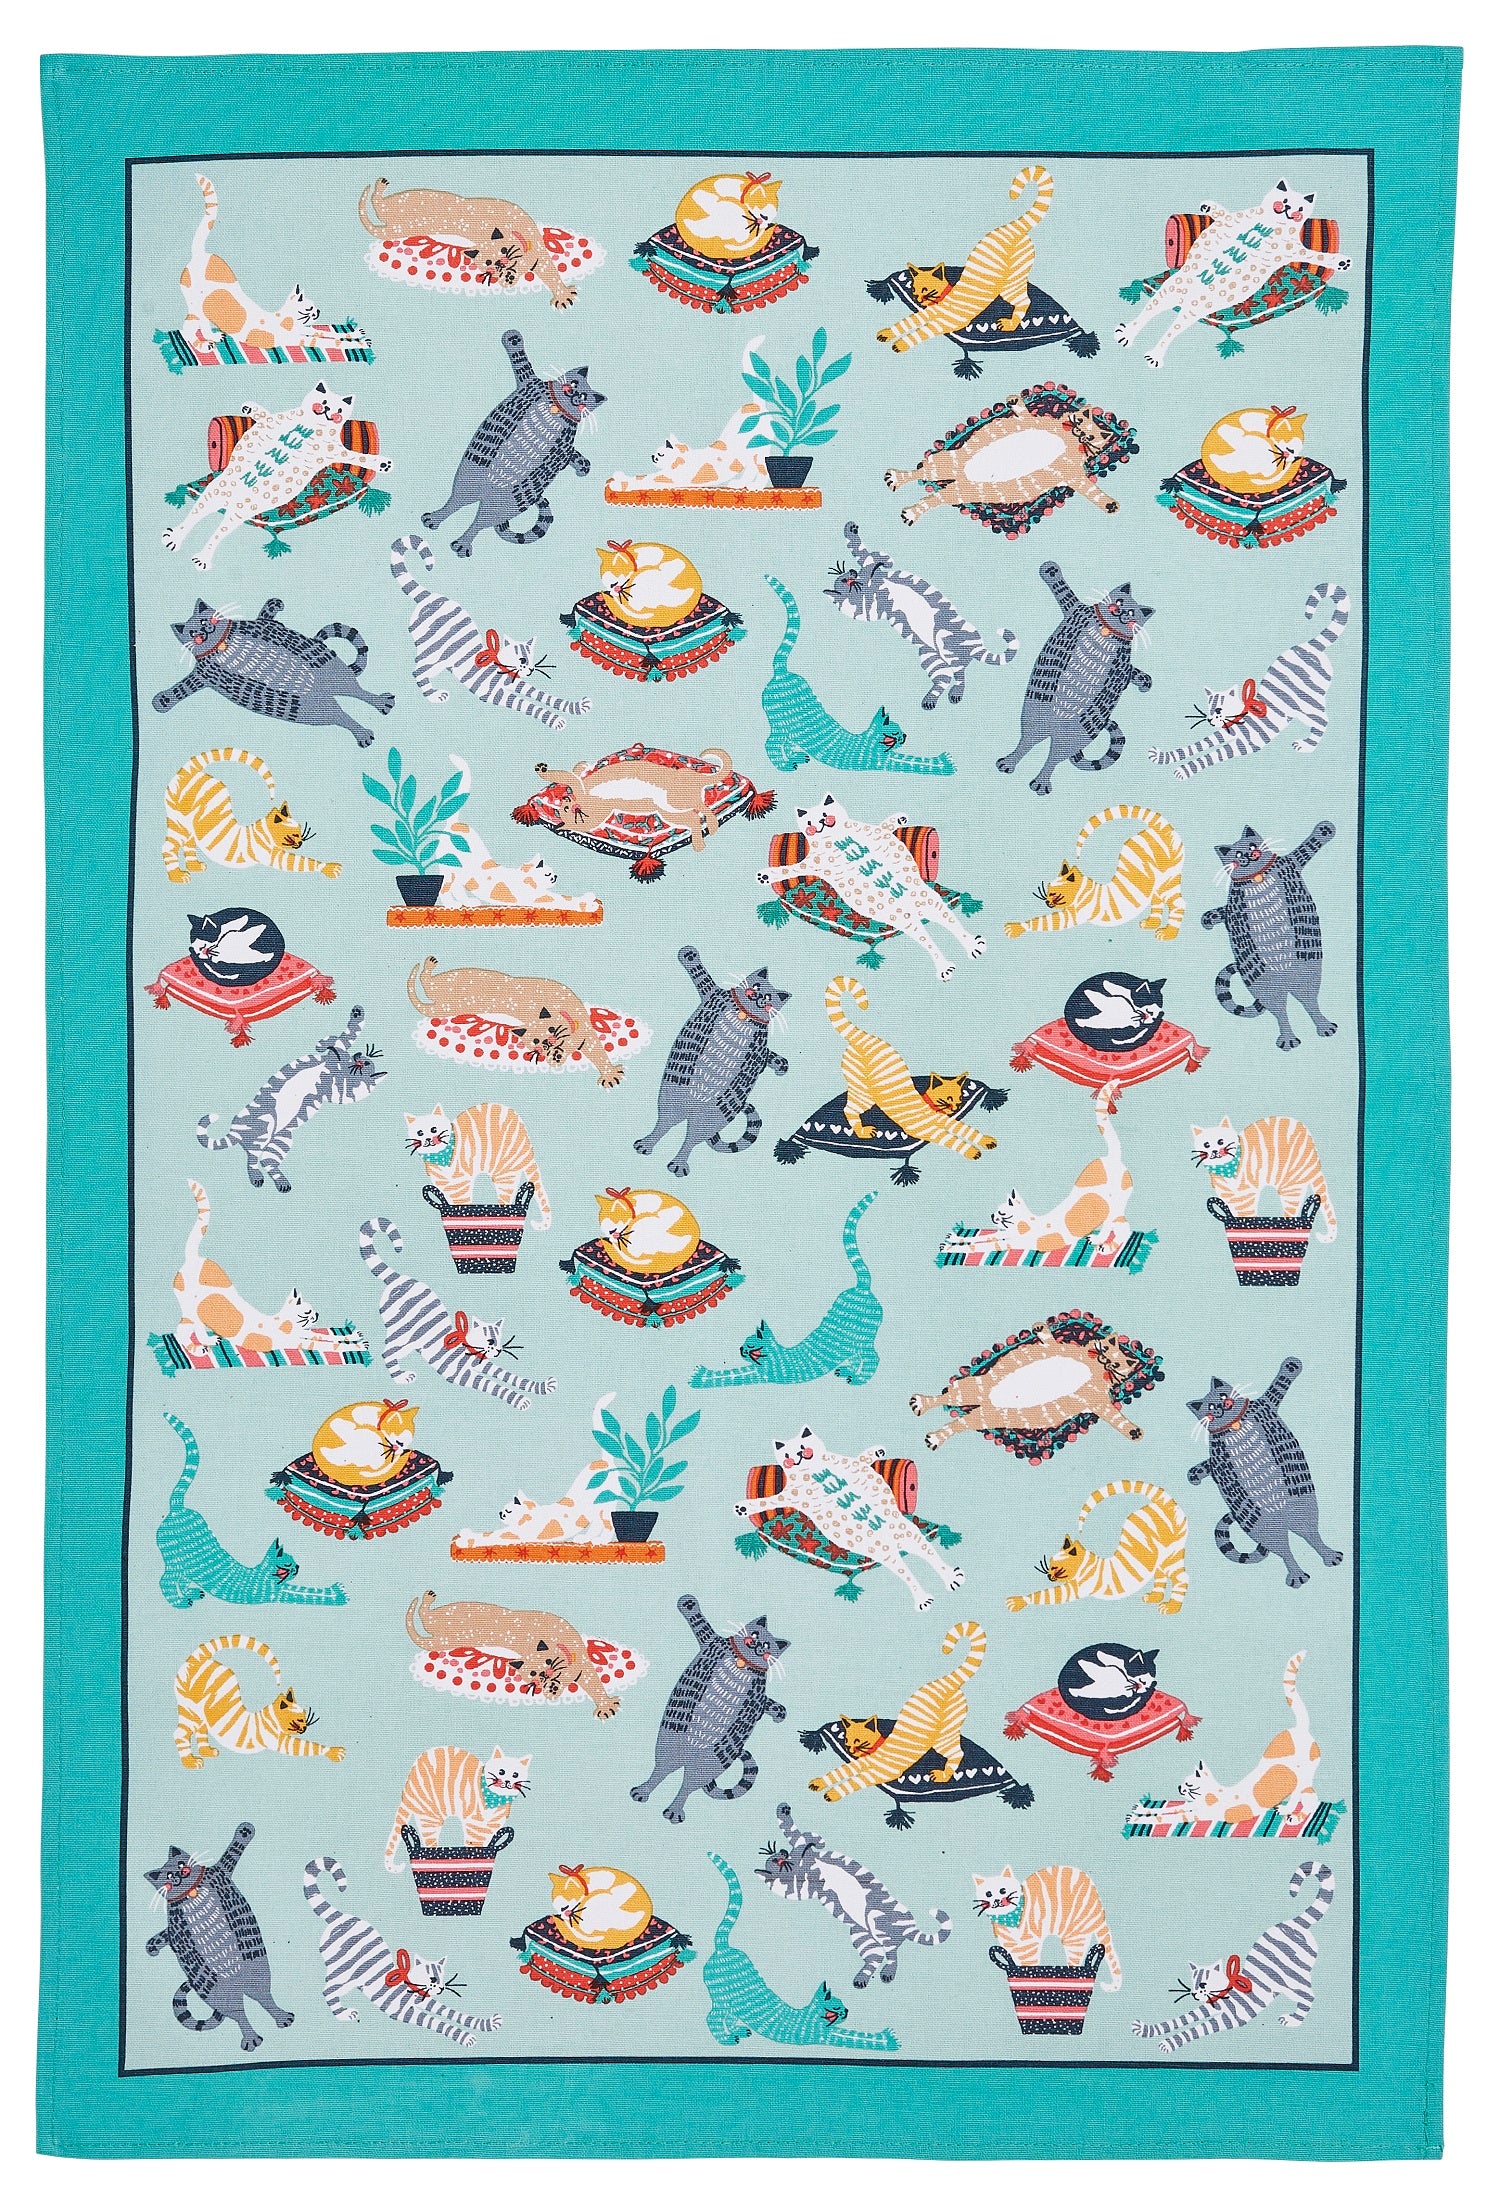 Ulster Weavers, "Kitty Cats", Pure cotton printed tea towel. - Home Landing